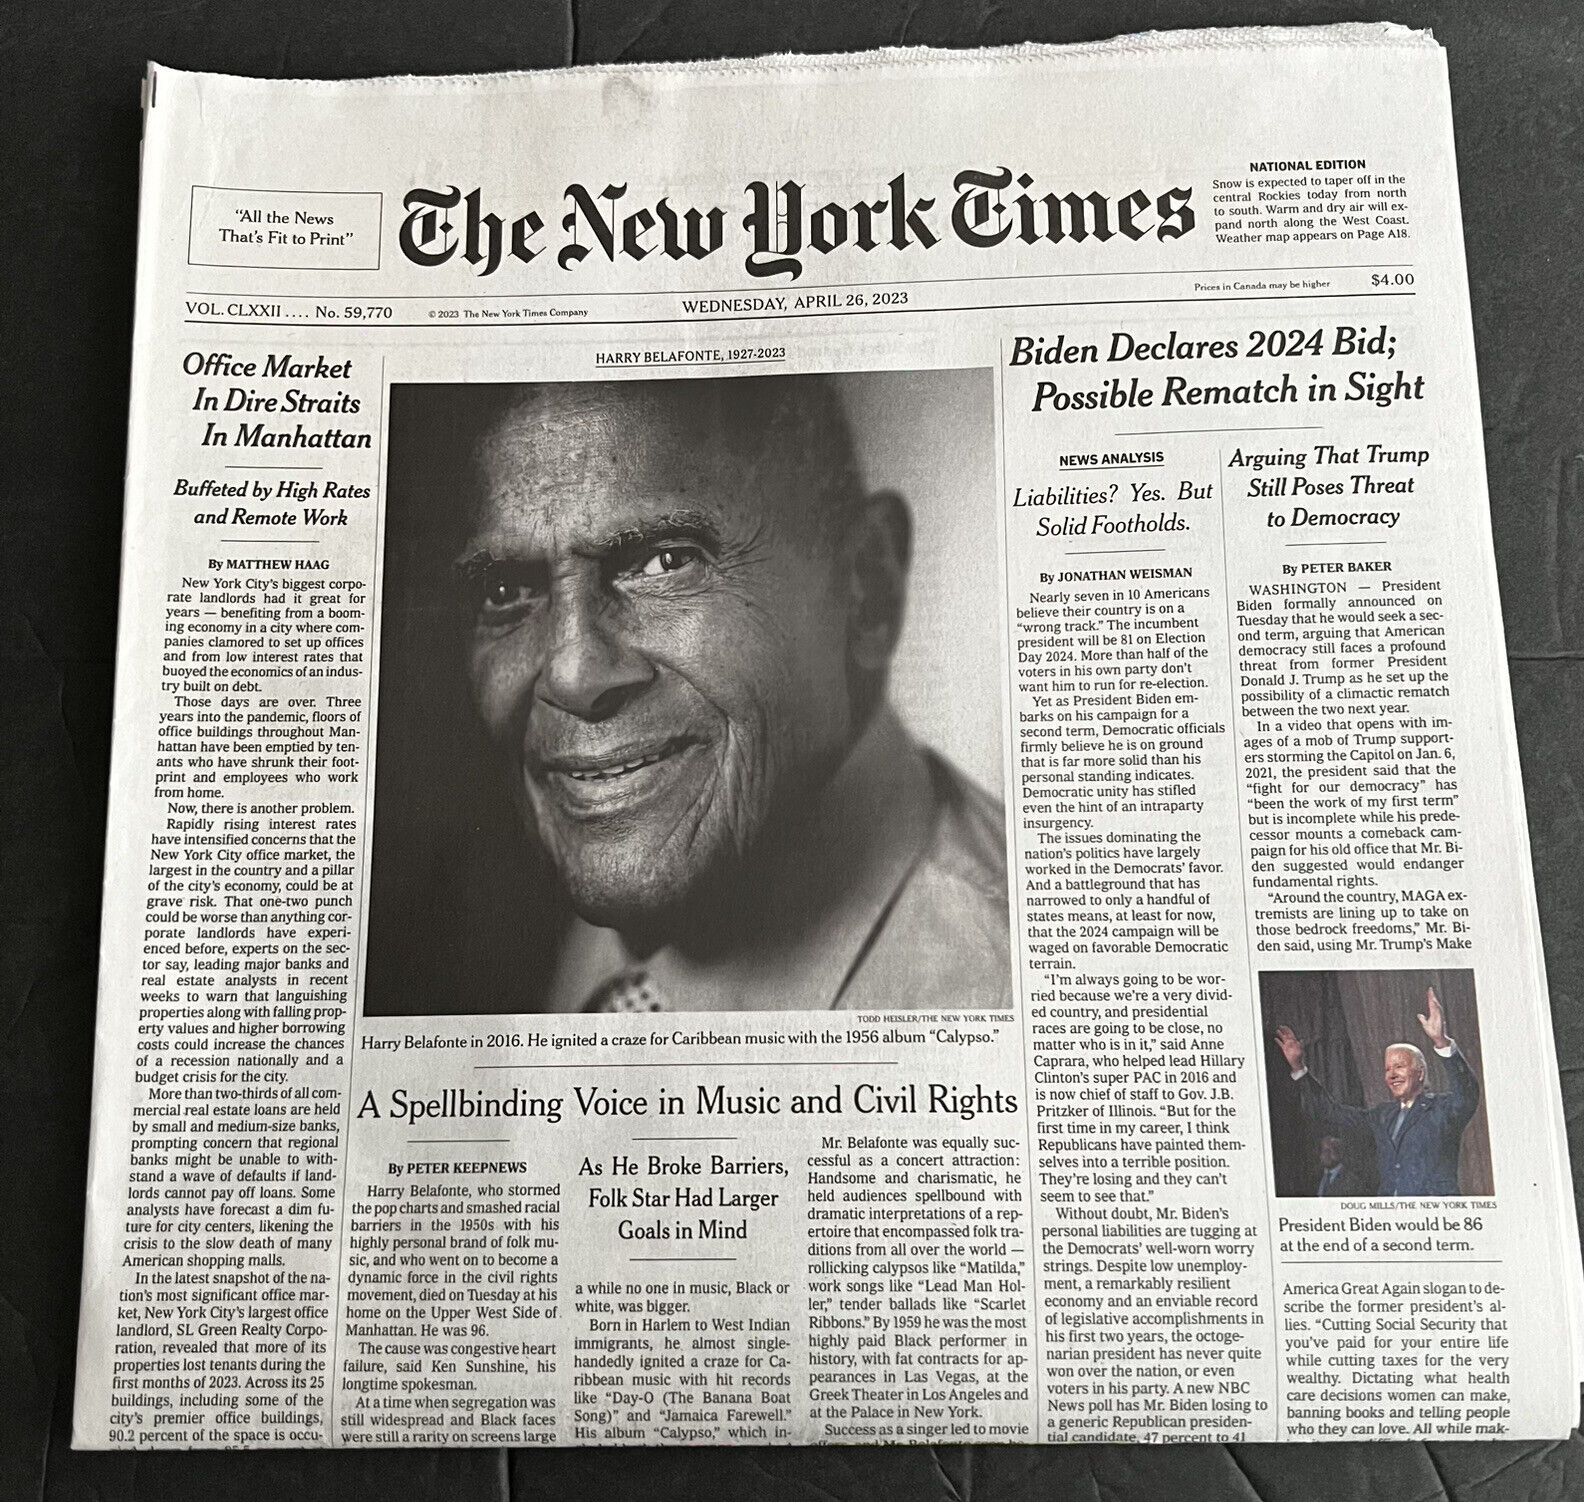 The New York Times Newspaper HARRY BELAFONTE 1927-2023 April 26 2023 Wednesday